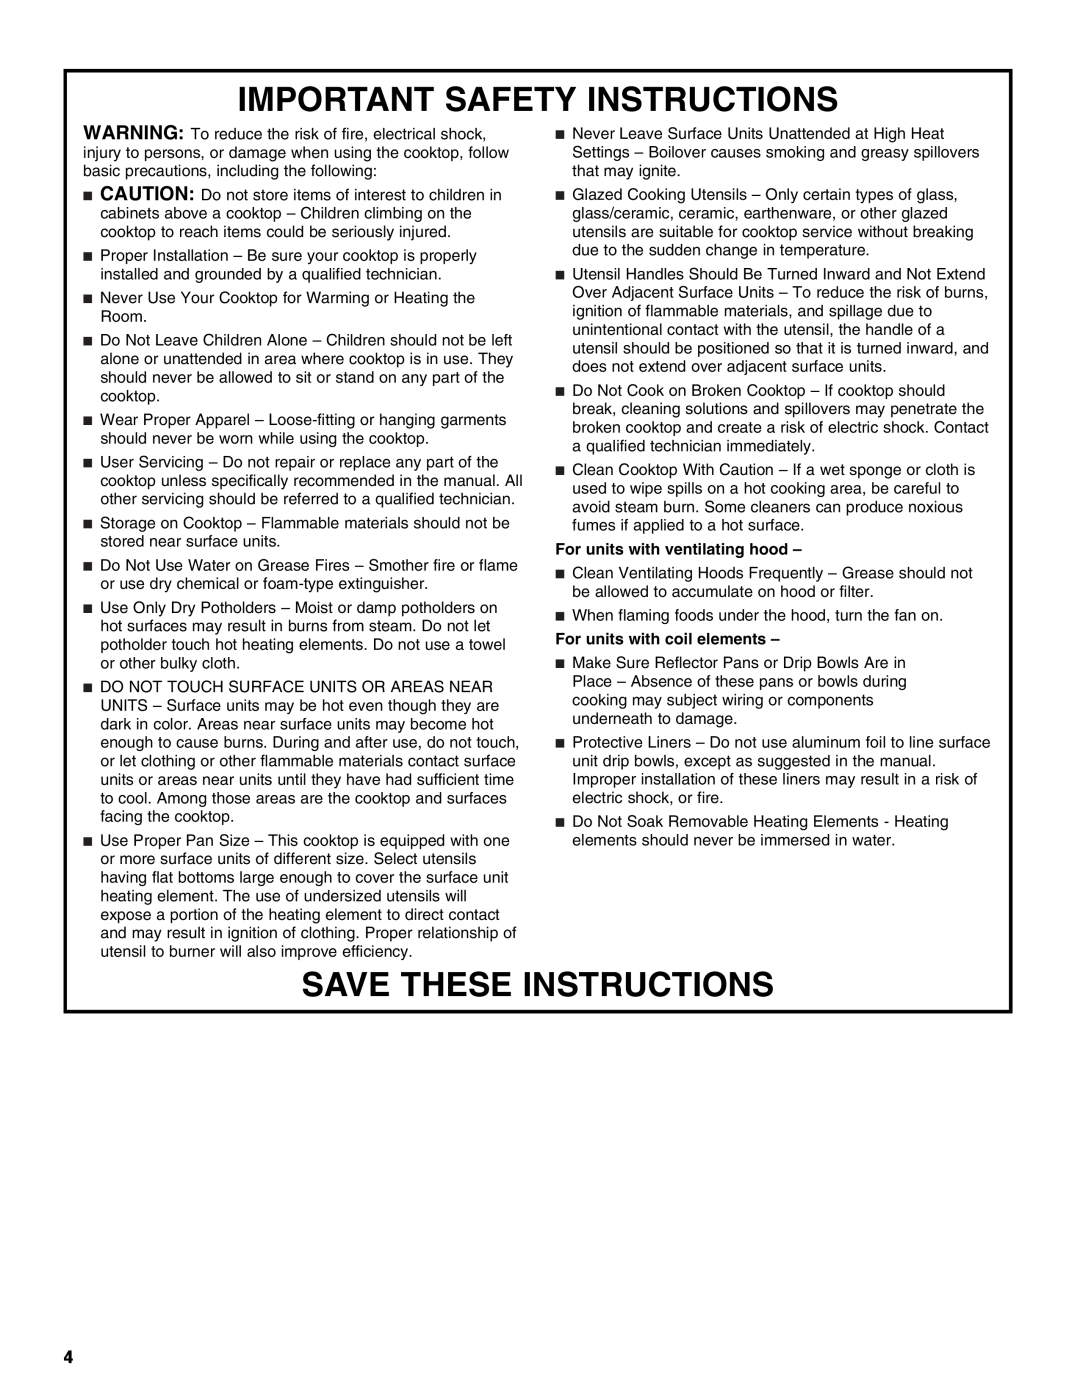 KitchenAid KECC056, KECC507 manual Important Safety Instructions, Save These Instructions, For units with ventilating hood 